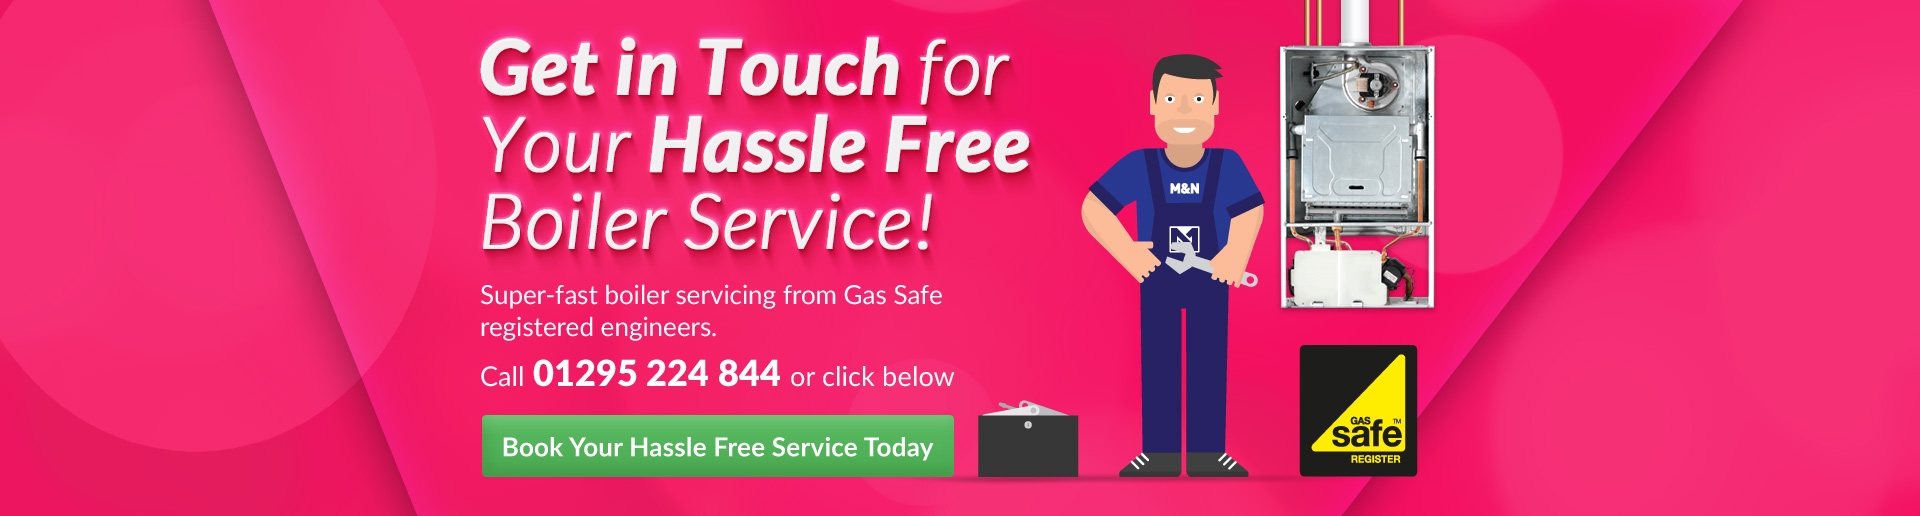 Hassle Free Boiler Services